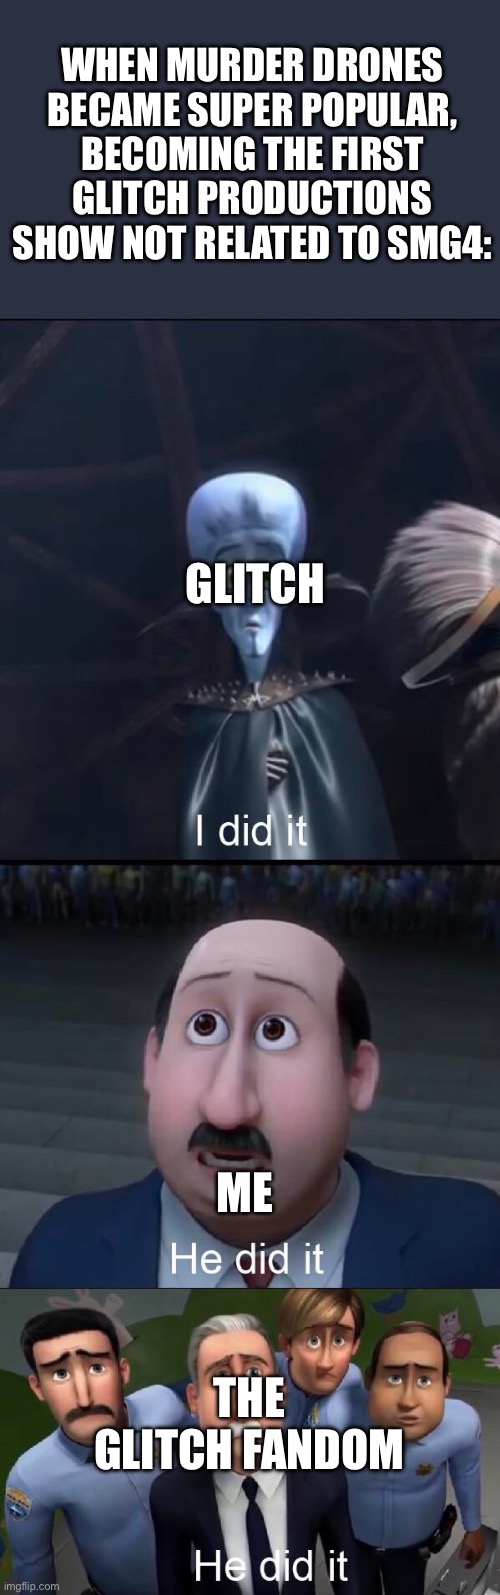 Correct me If I’m wrong. | WHEN MURDER DRONES BECAME SUPER POPULAR, BECOMING THE FIRST GLITCH PRODUCTIONS SHOW NOT RELATED TO SMG4:; GLITCH; ME; THE GLITCH FANDOM | image tagged in i did it,memeder drones | made w/ Imgflip meme maker